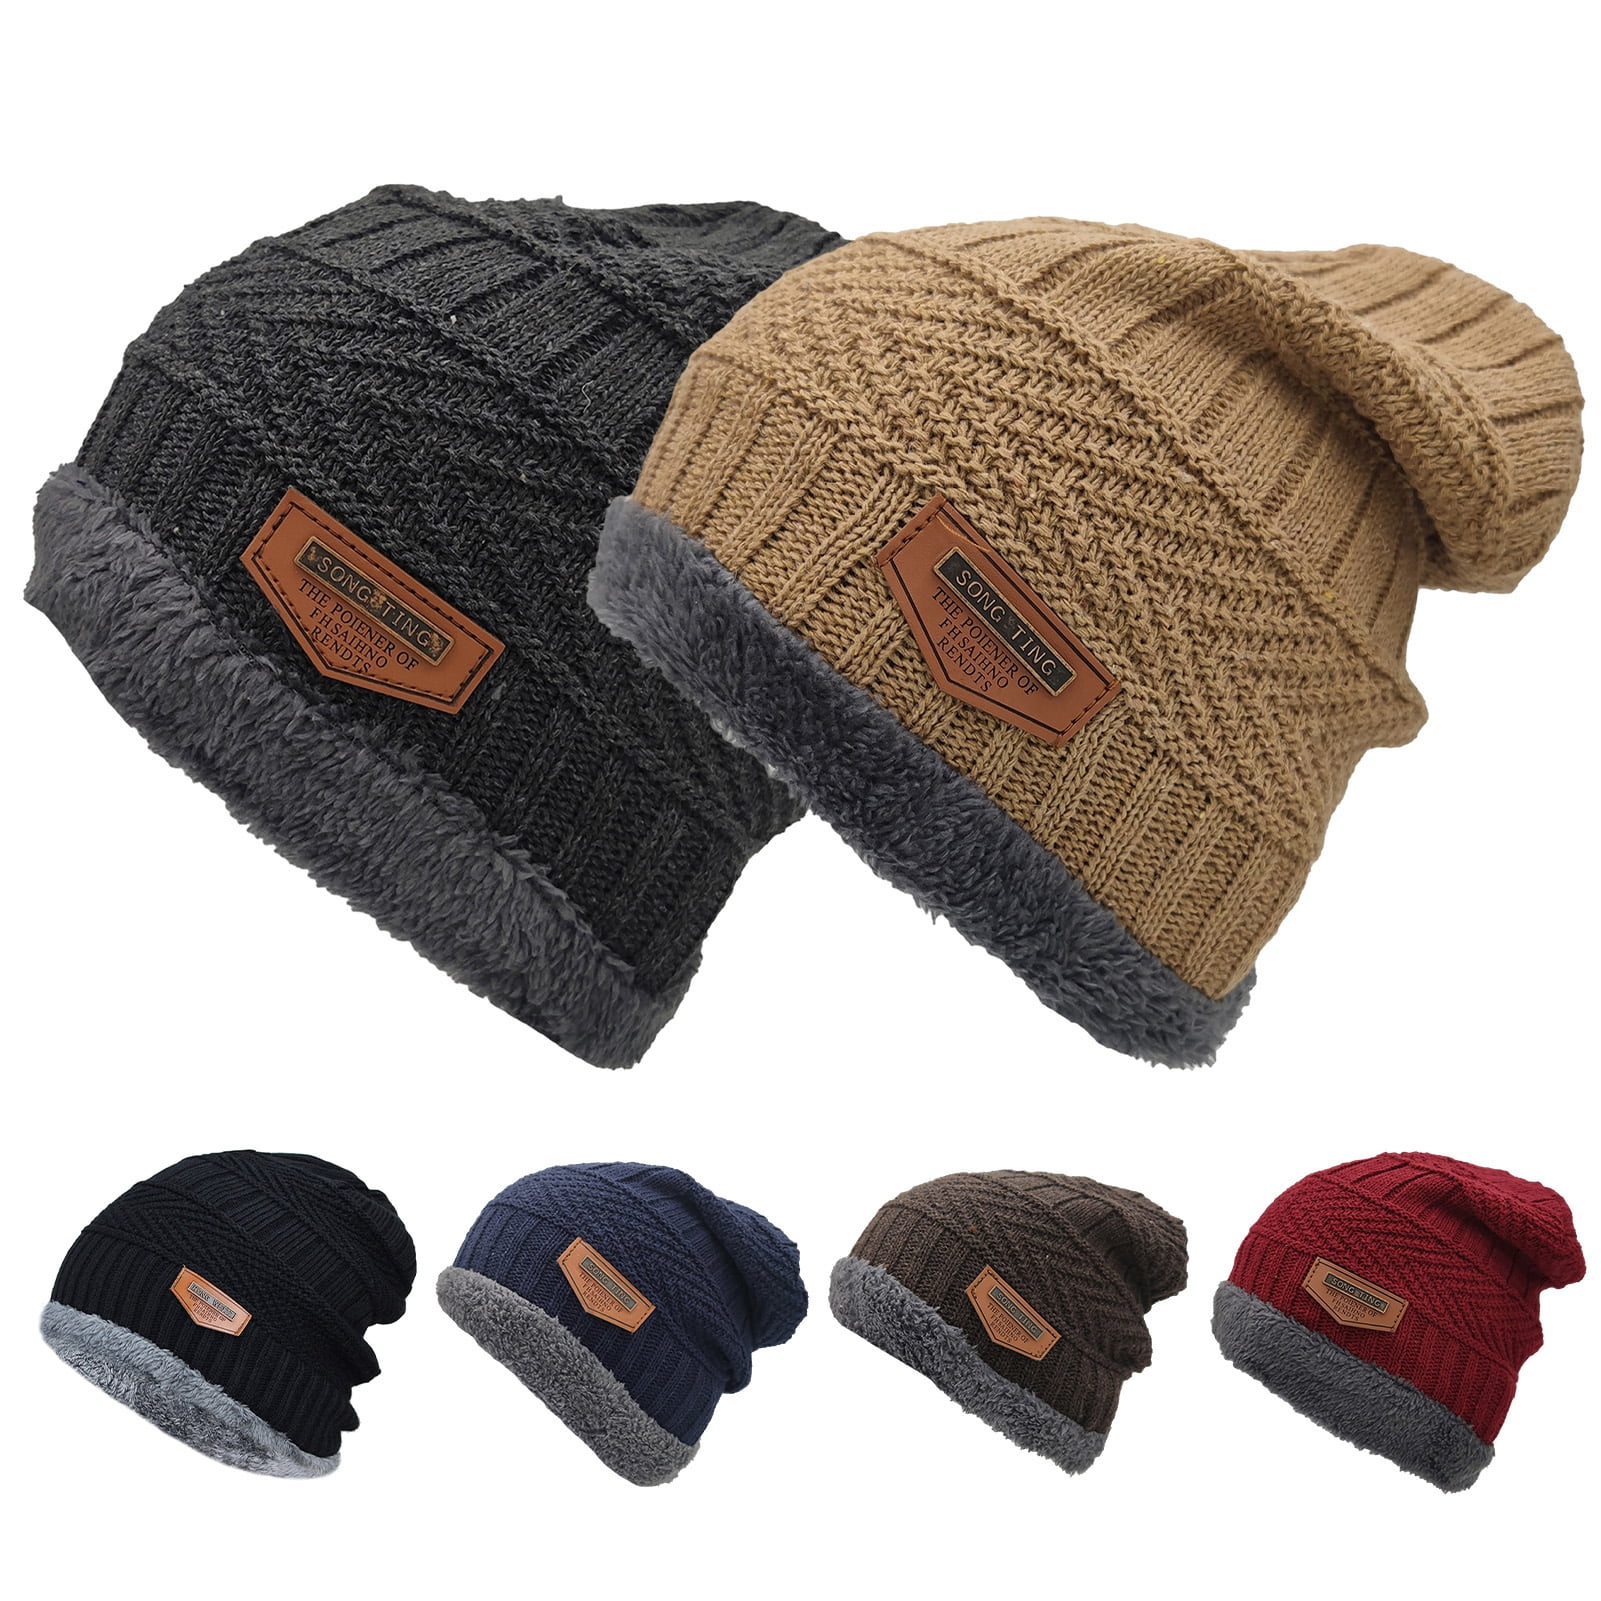 Chicmine Men Winter Hat Knitted Unisex Fleece Thickened Soft Keep